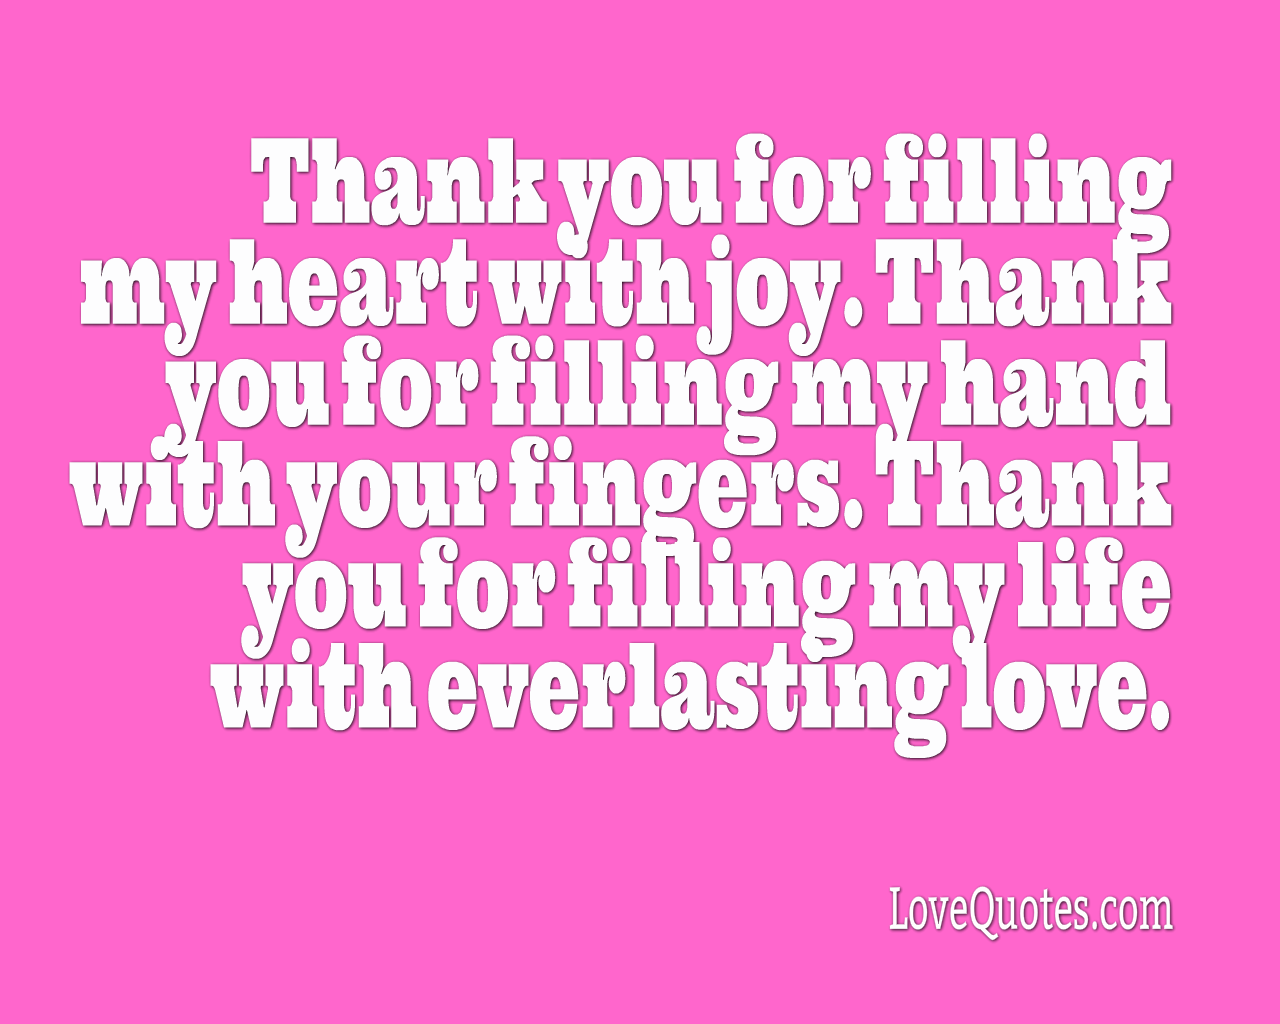 With Everlasting Love